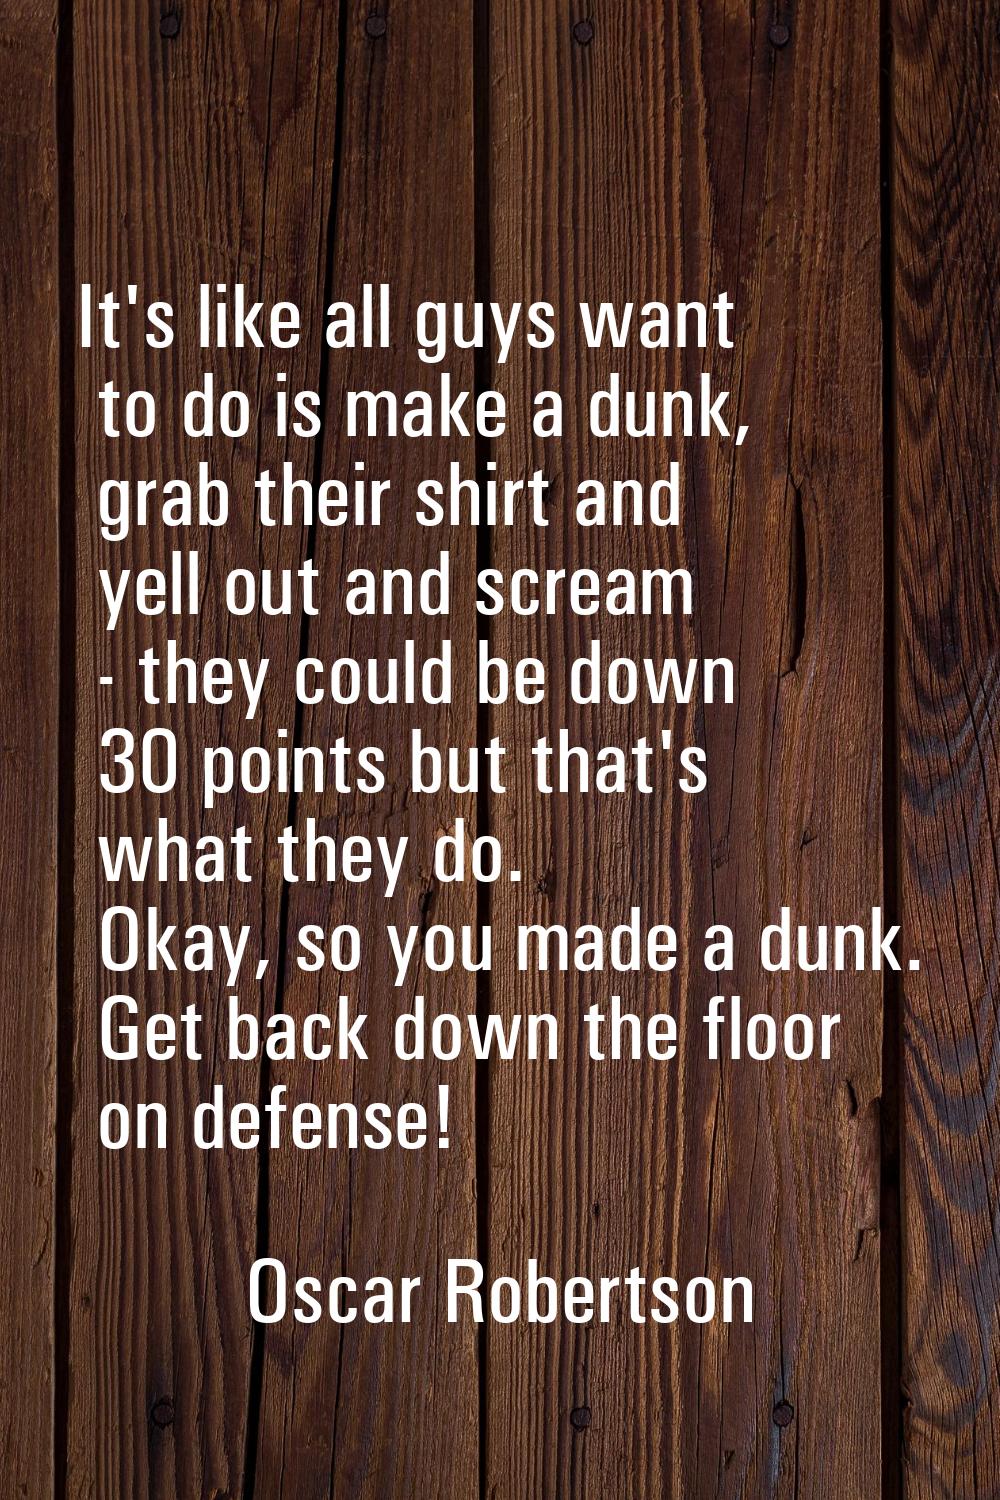 It's like all guys want to do is make a dunk, grab their shirt and yell out and scream - they could